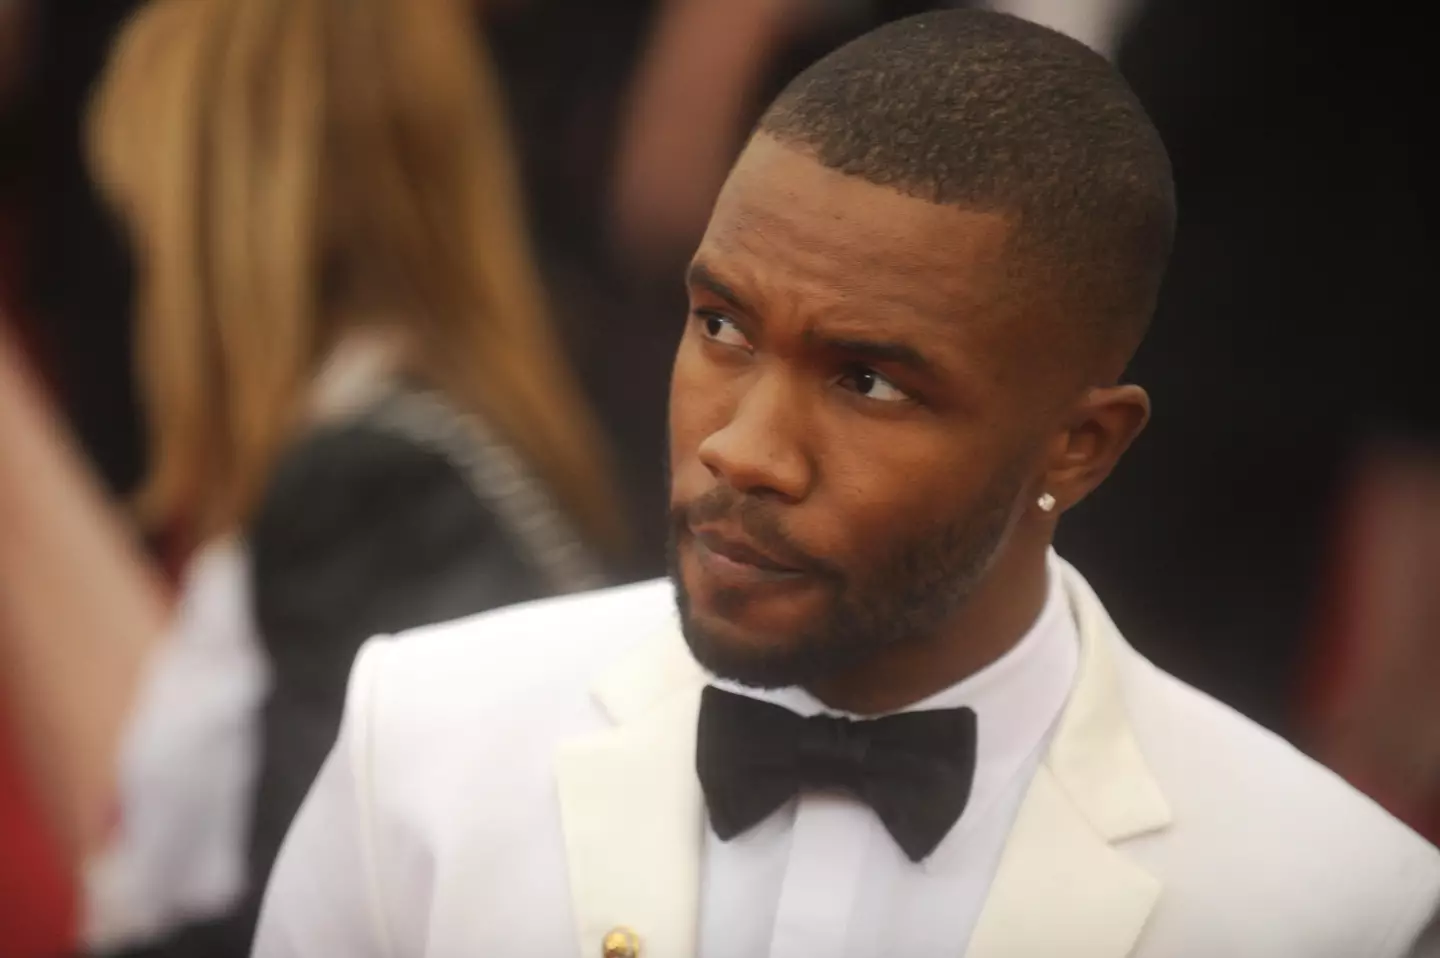 Frank Ocean’s appearance at Coachella was his first live performance since 2017.